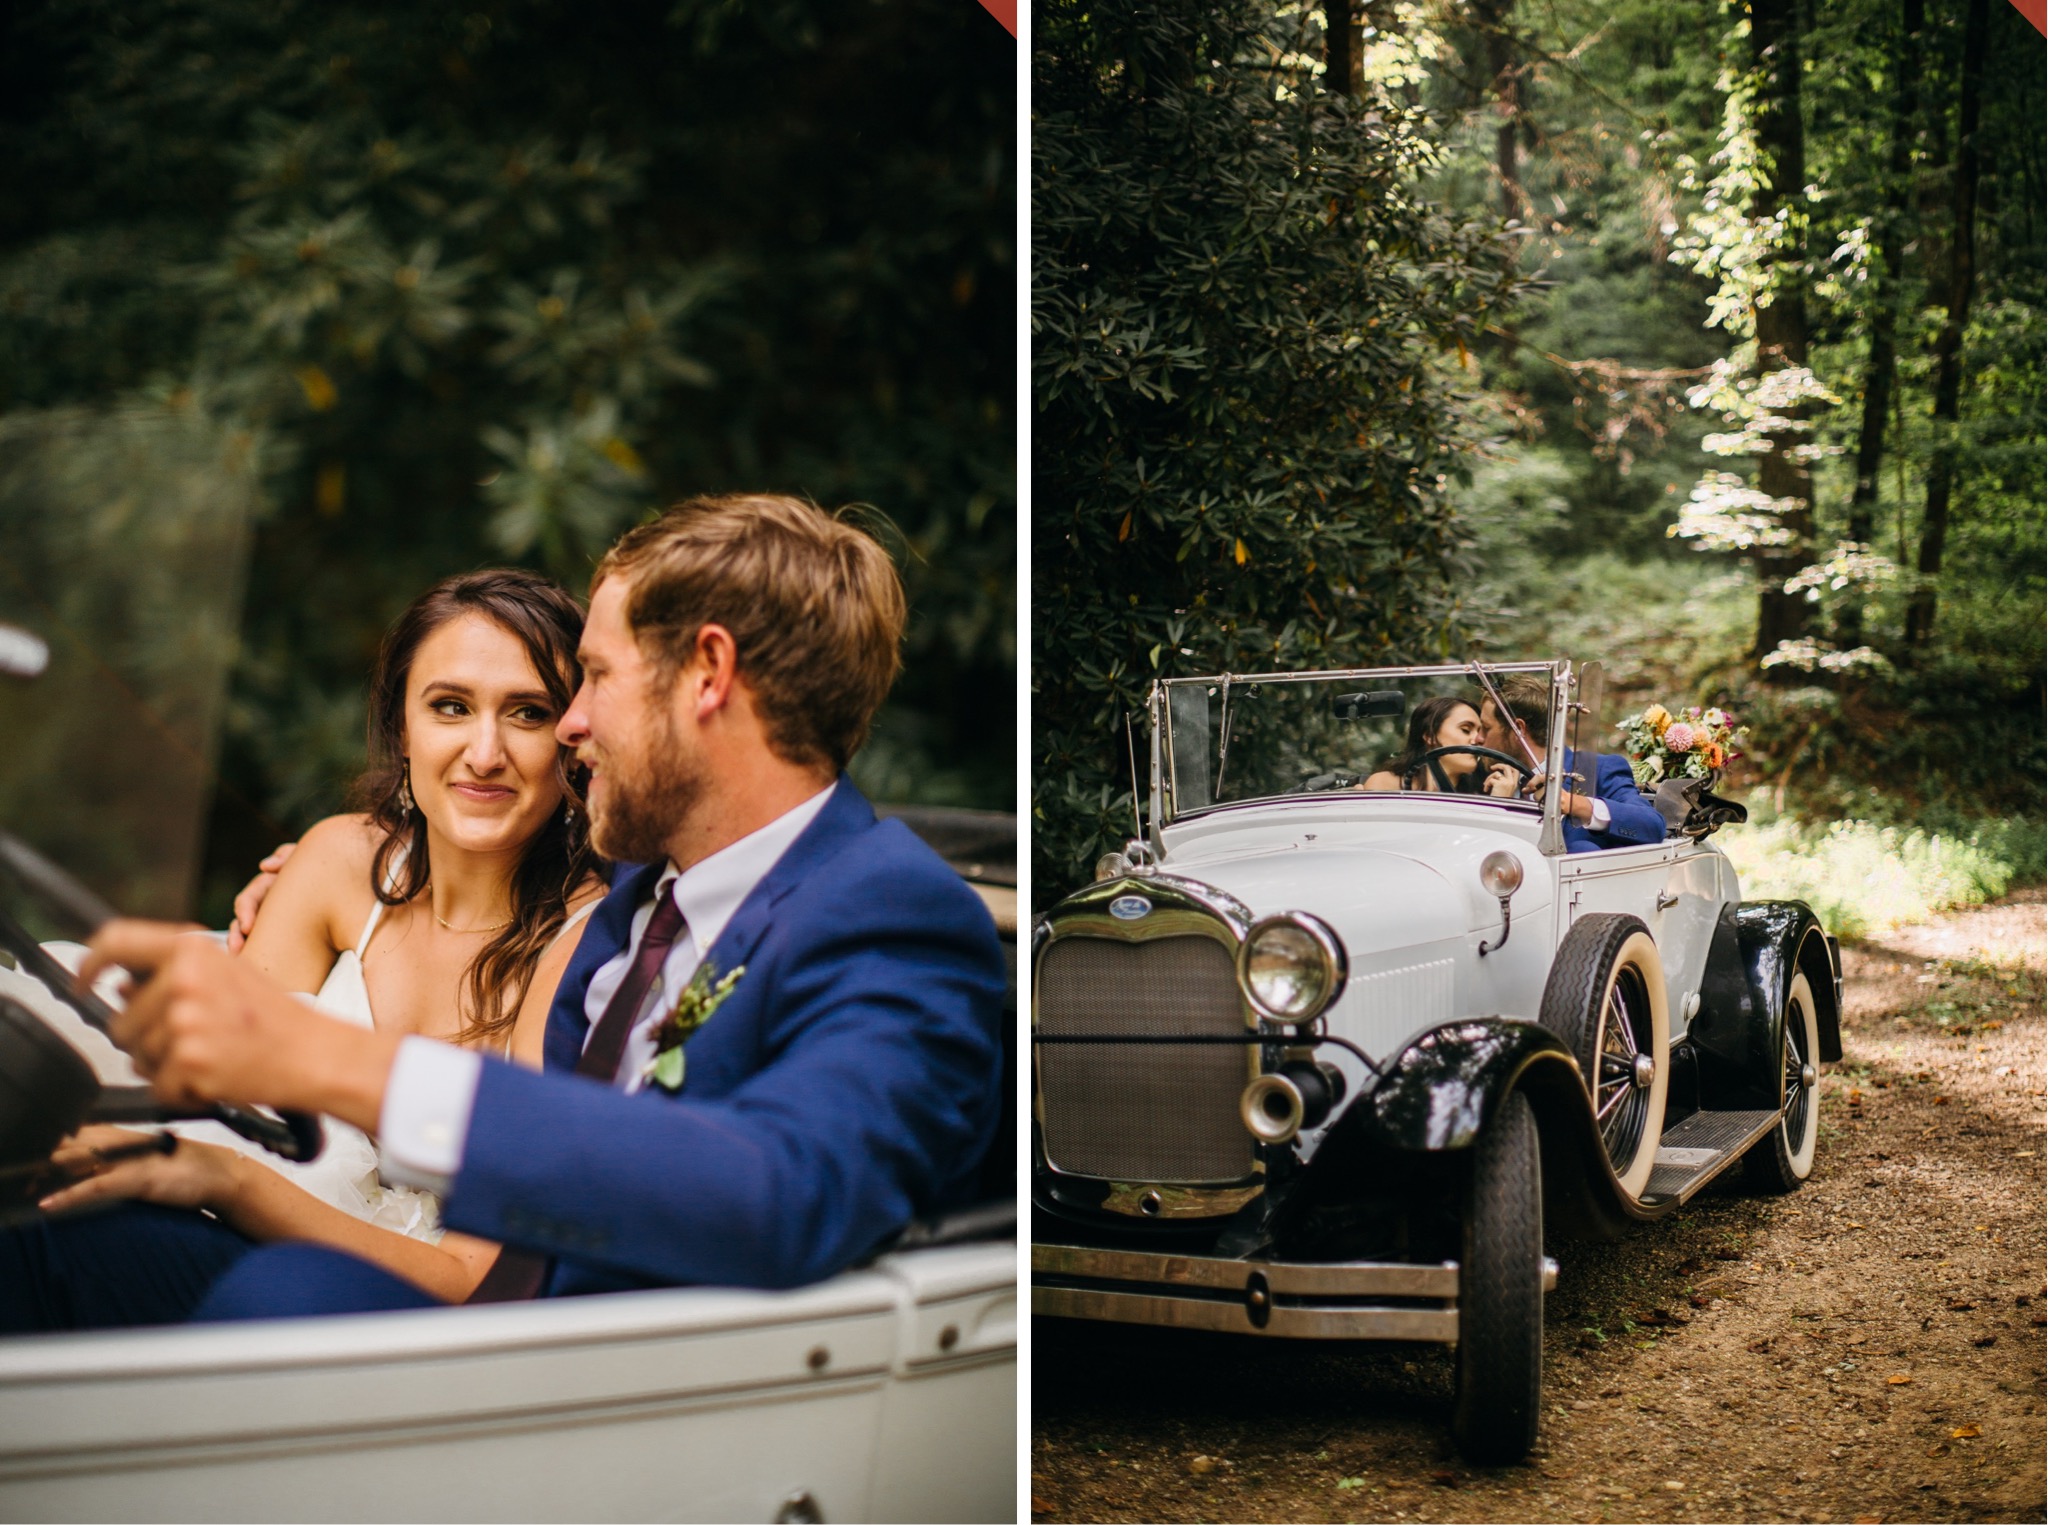 The bride and groom snuggle up and share a kiss in a vintage white car in the woods.